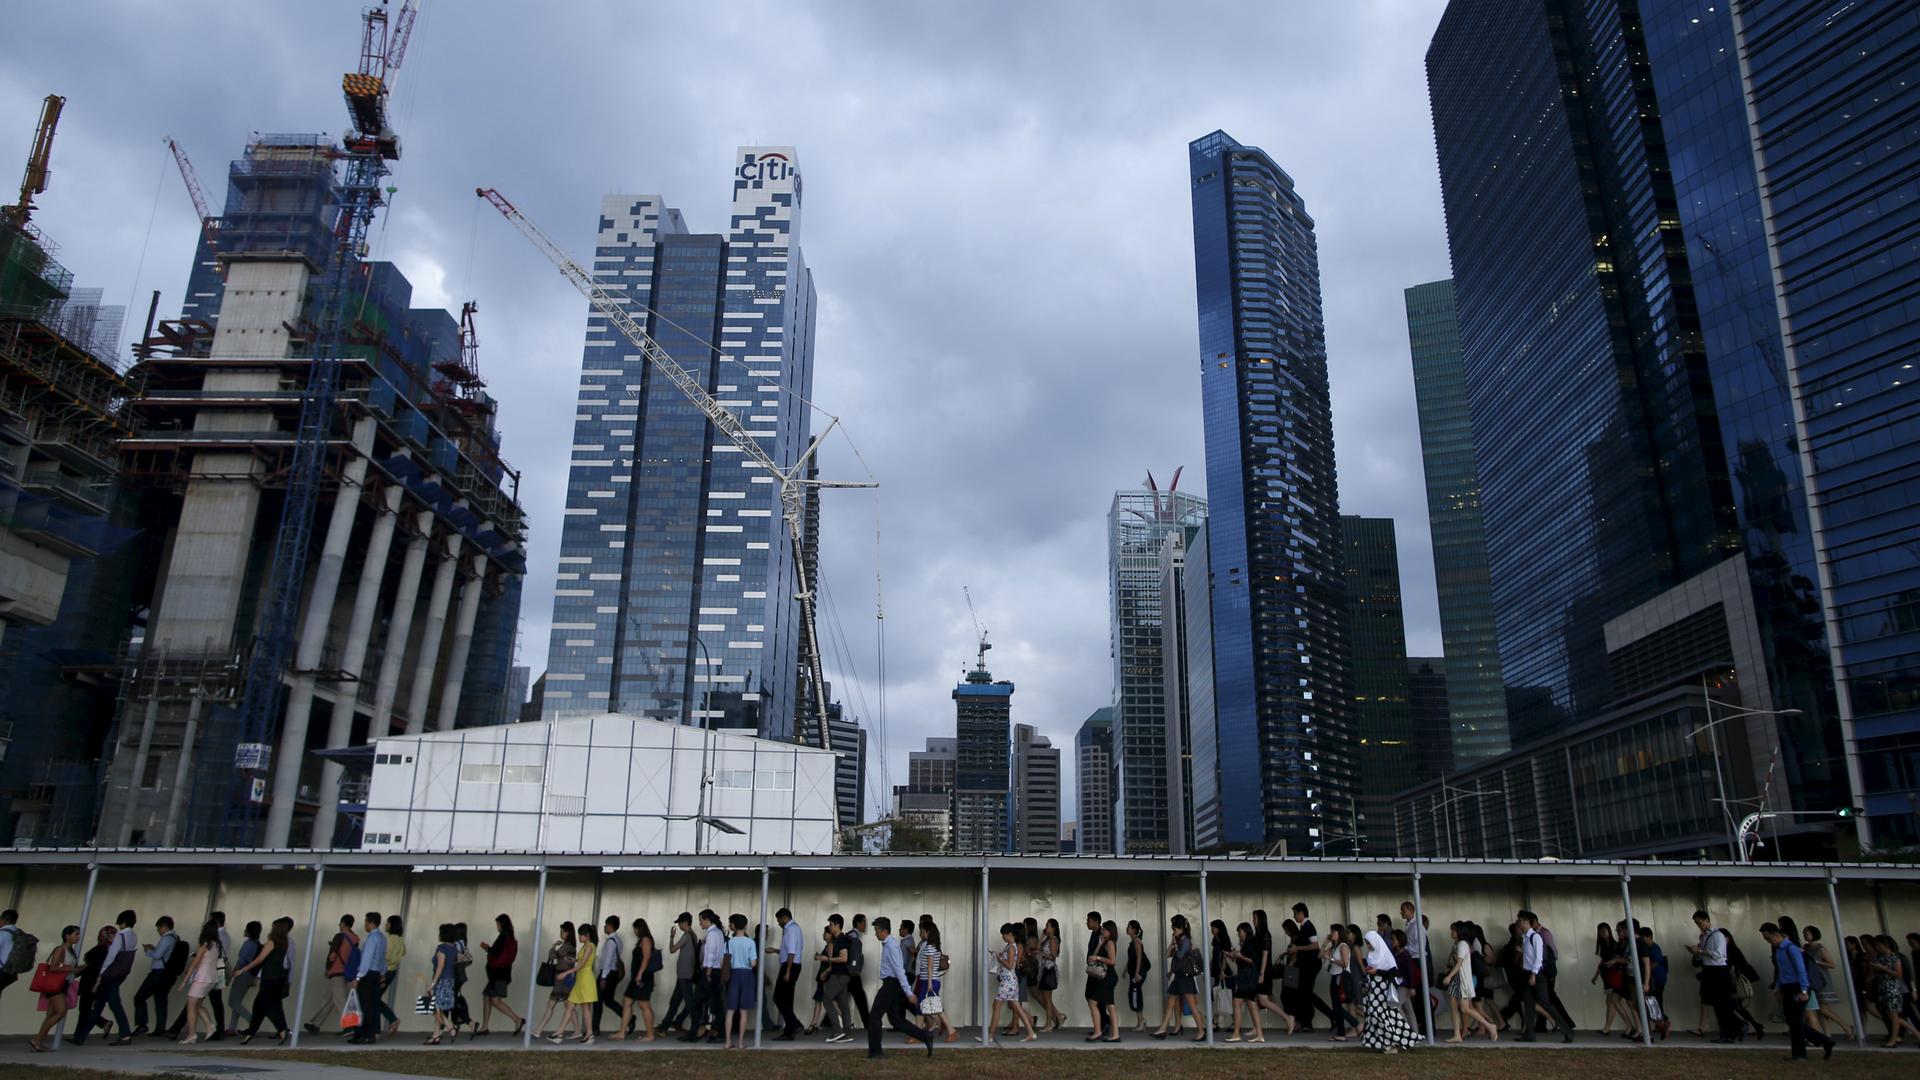 Commuters walk to the train station during evening rush hour in the financial district of Singapore March 9, 2015.